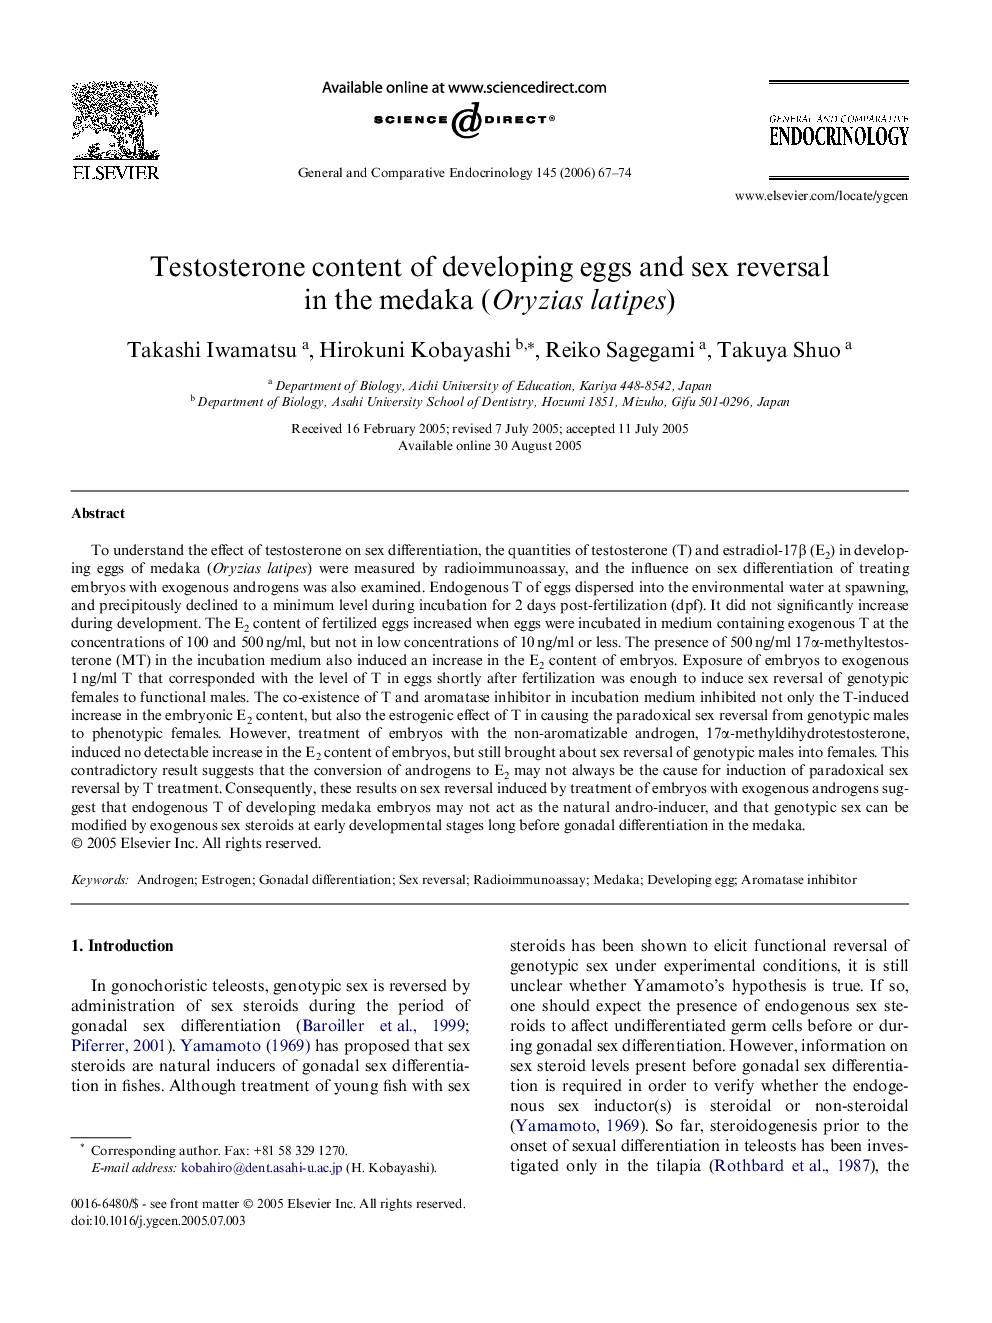 Testosterone content of developing eggs and sex reversal in the medaka (Oryzias latipes)